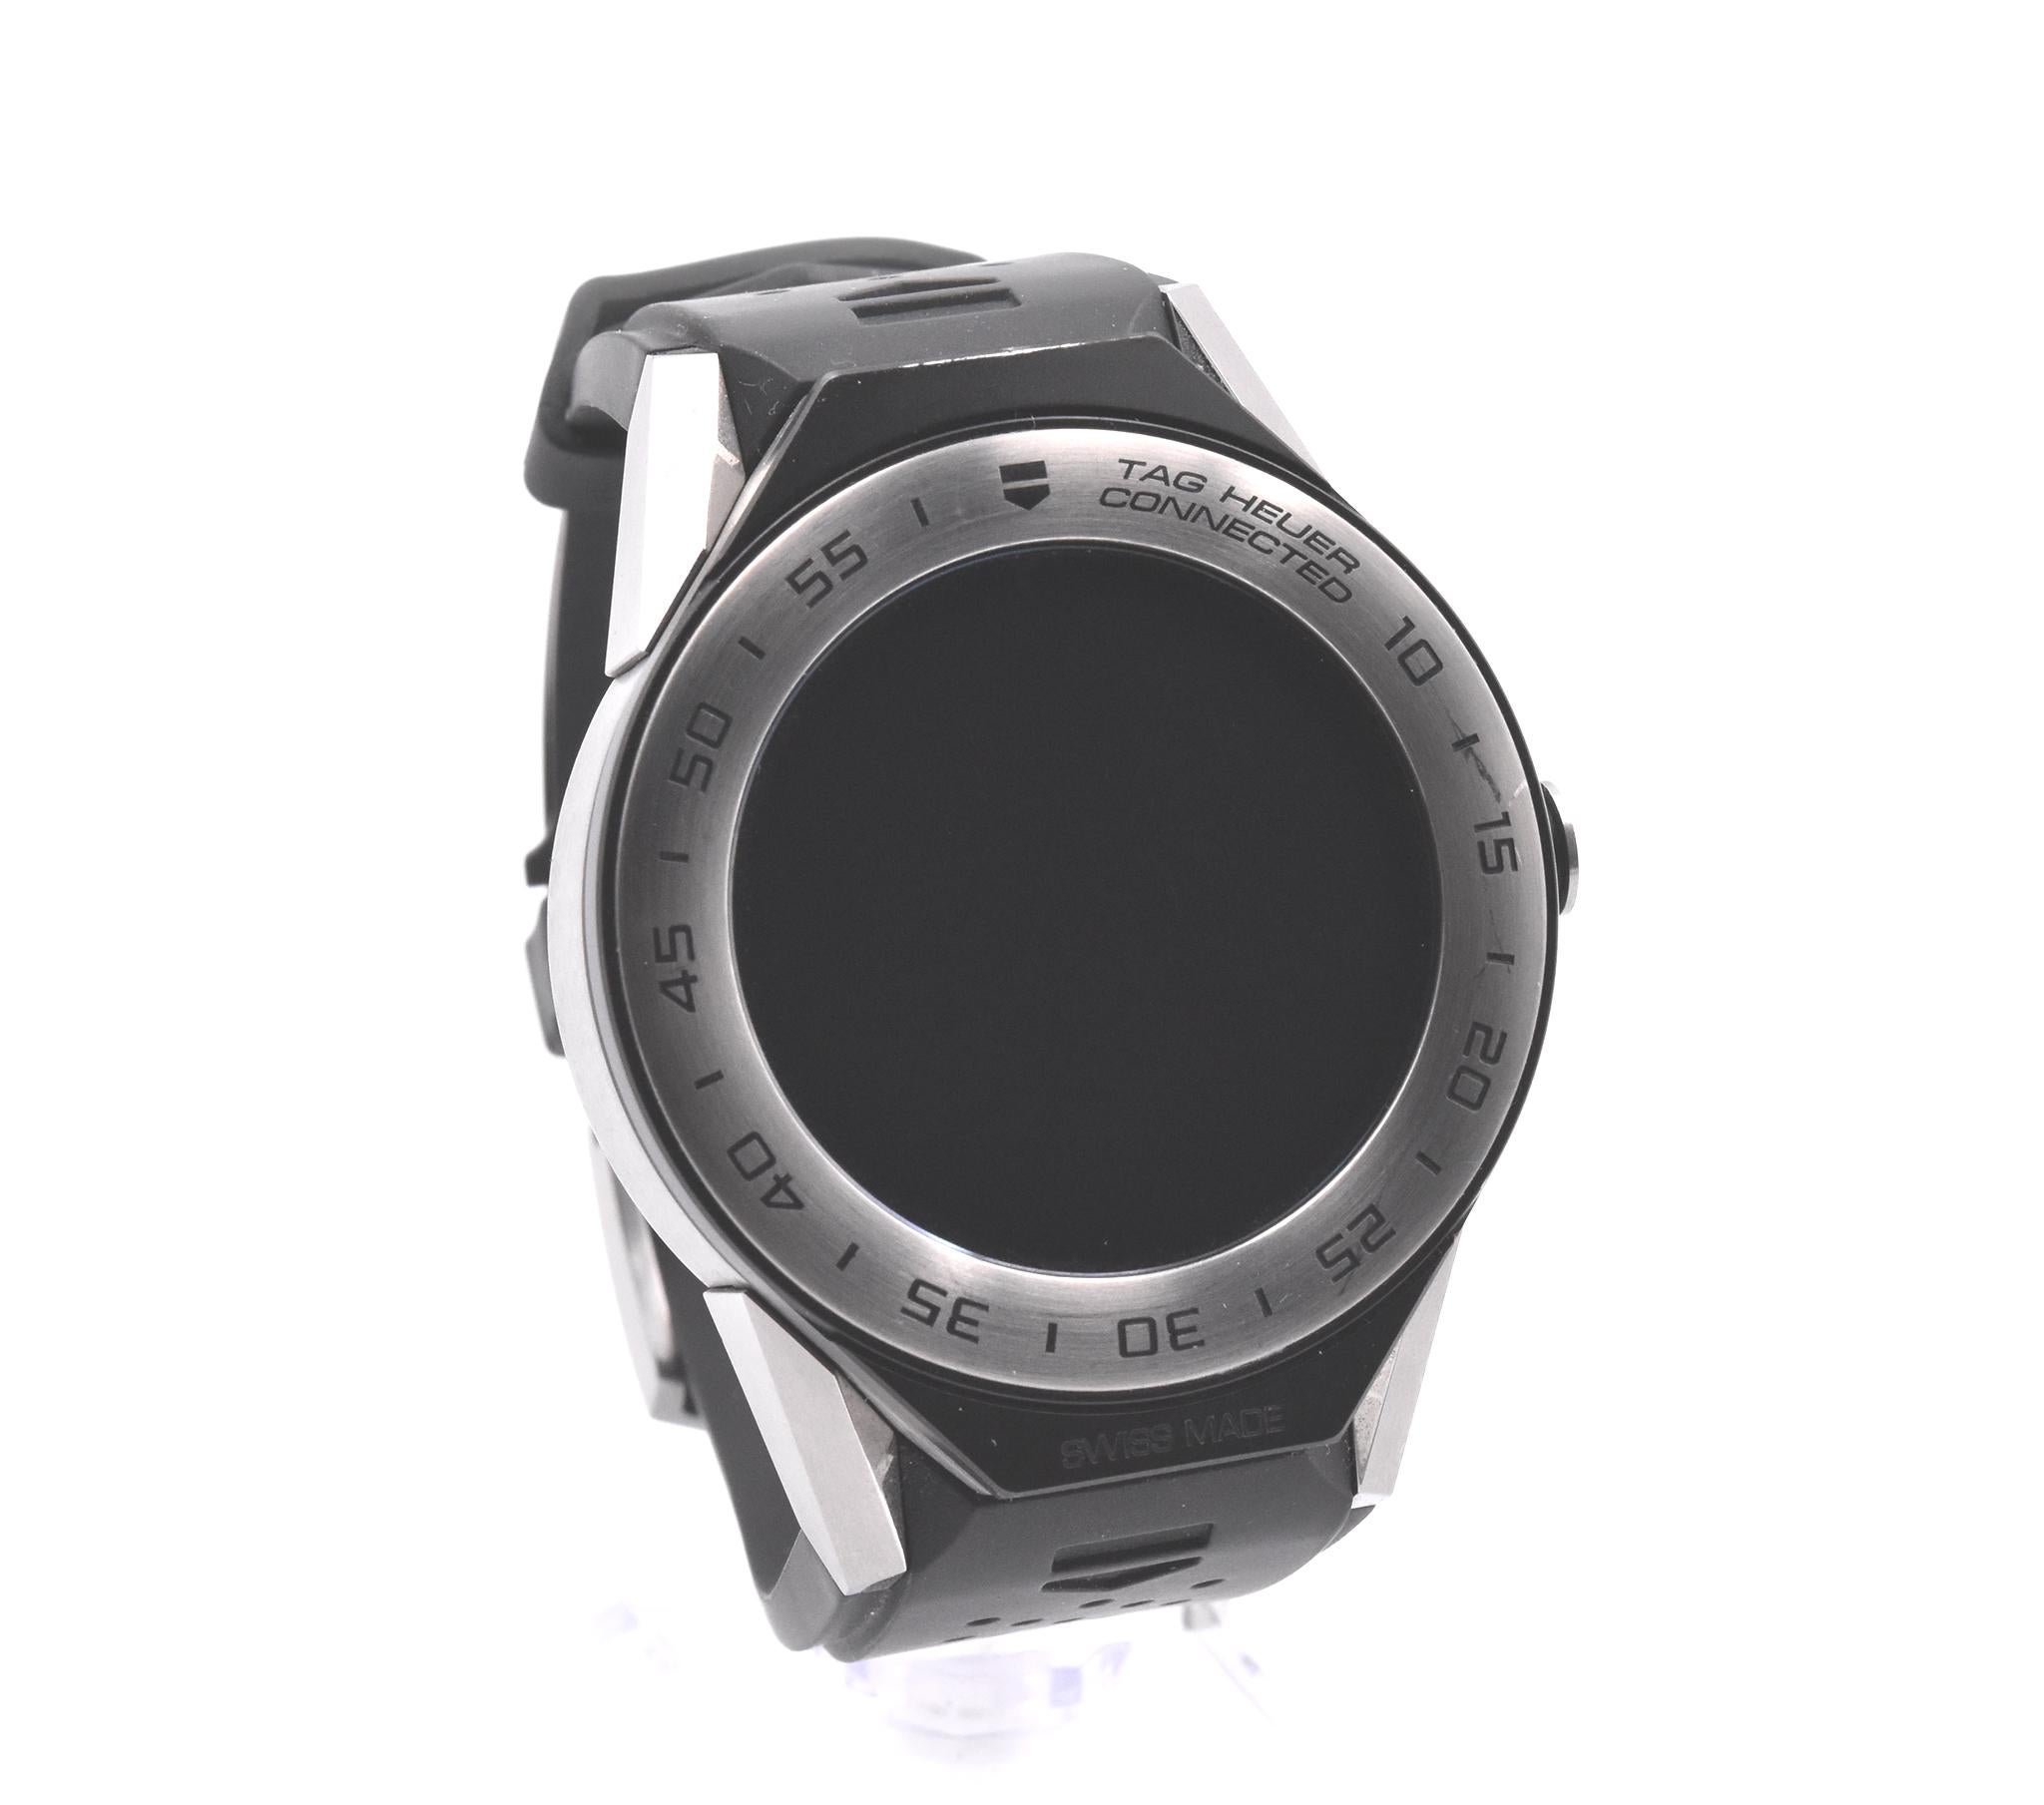 
Movement: quartz, smartwatch
Function: Chronograph, Date, Hour, Minute, Second, Alarm, Timer, GPS, Accelerometer, Gyroscope with Tilt Detection, Ambient Light Sensor, Microphone, NFC Payment Feature, Compatible with Android 4.4+ / IOS 9+ 
Case: